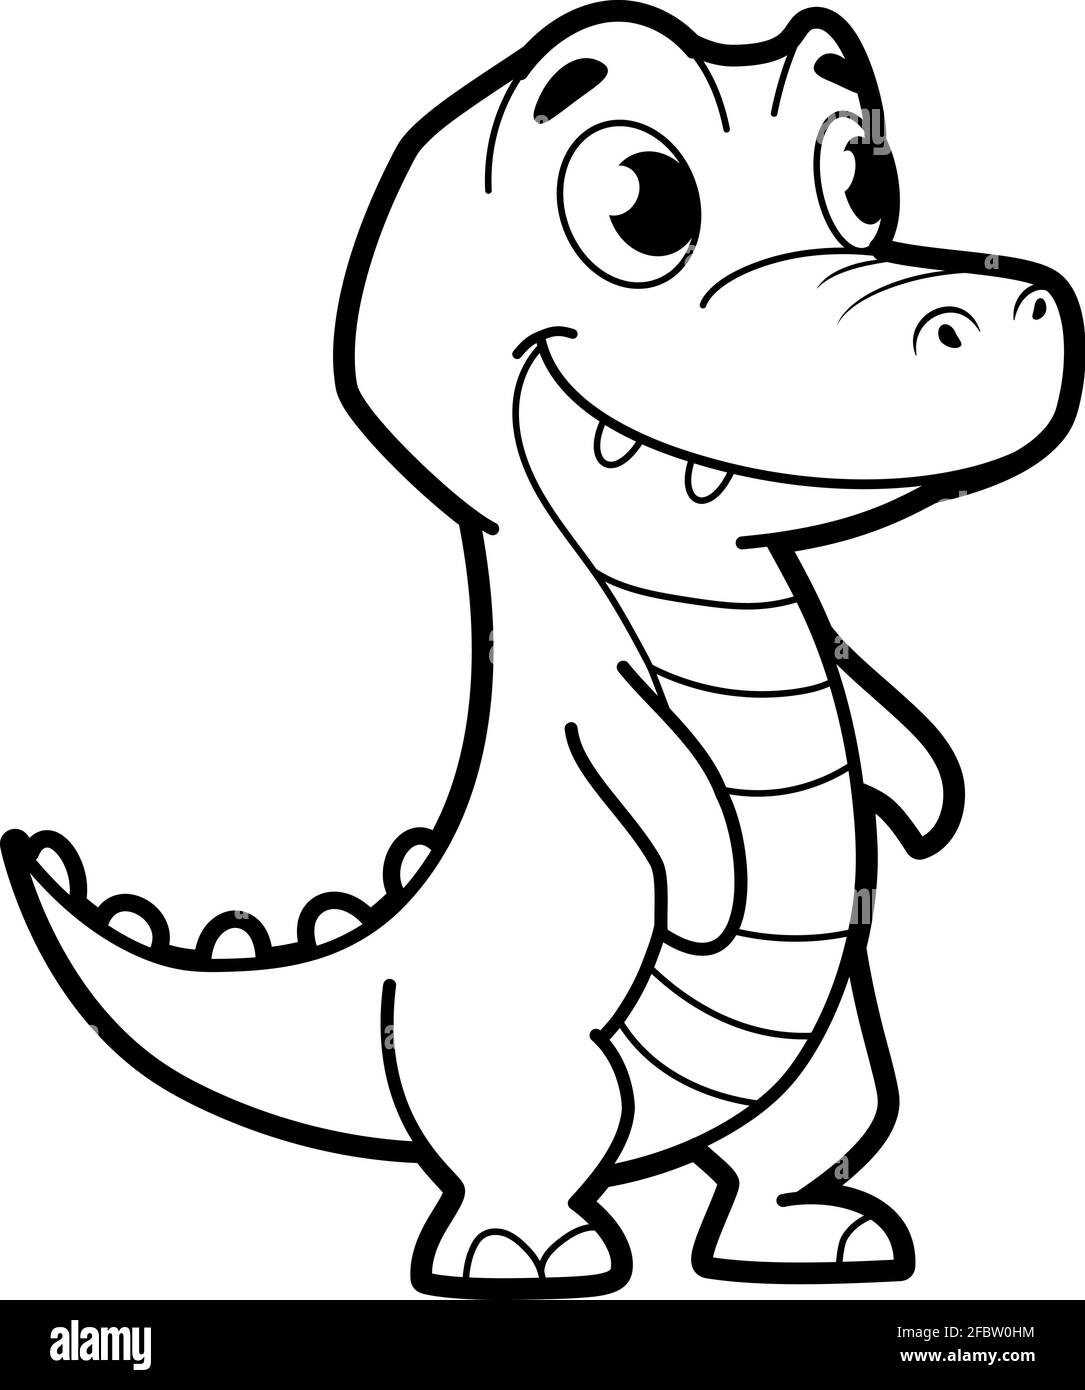 Crocodile of kids black and white stock photos images